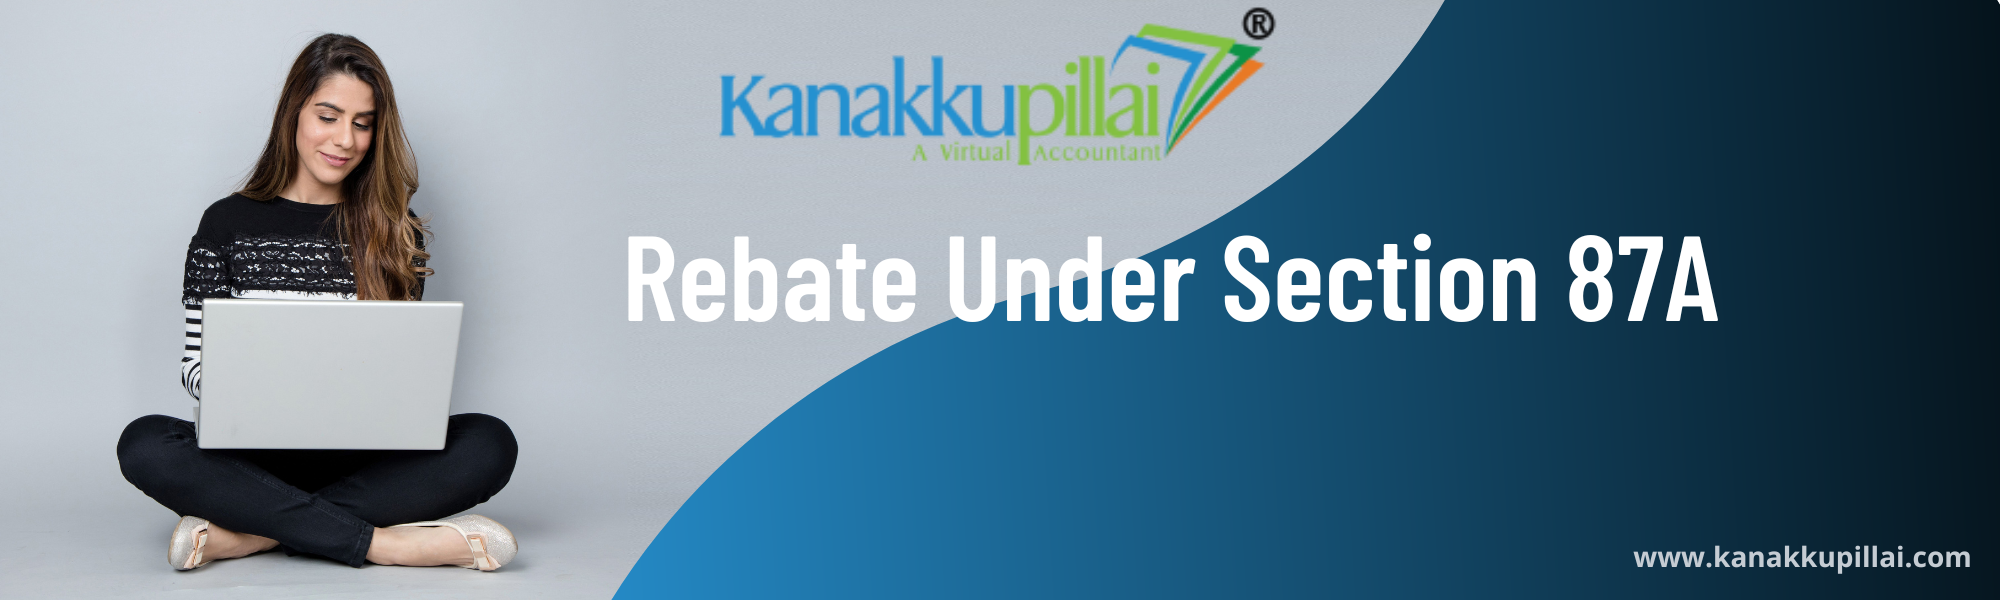 rebate-under-section-87a